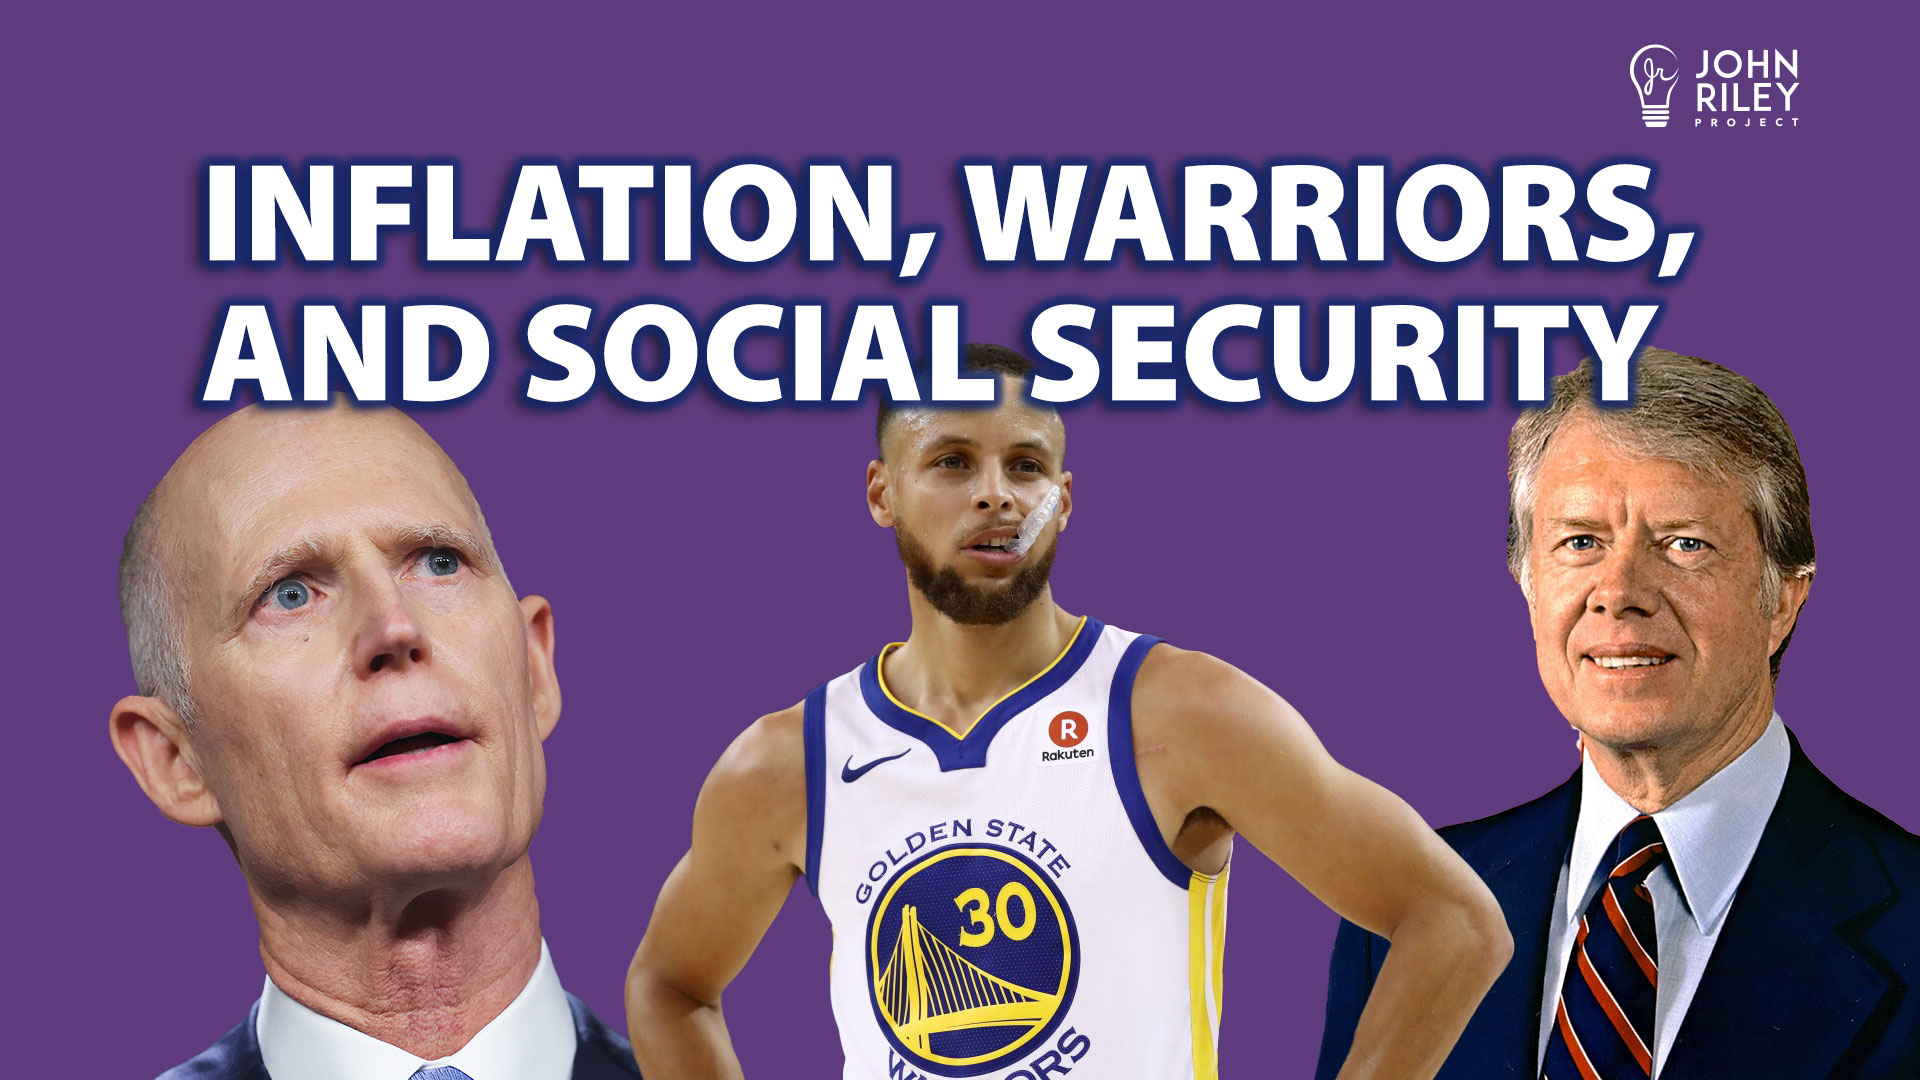 golden state warriors, inflation, social security, john riley project